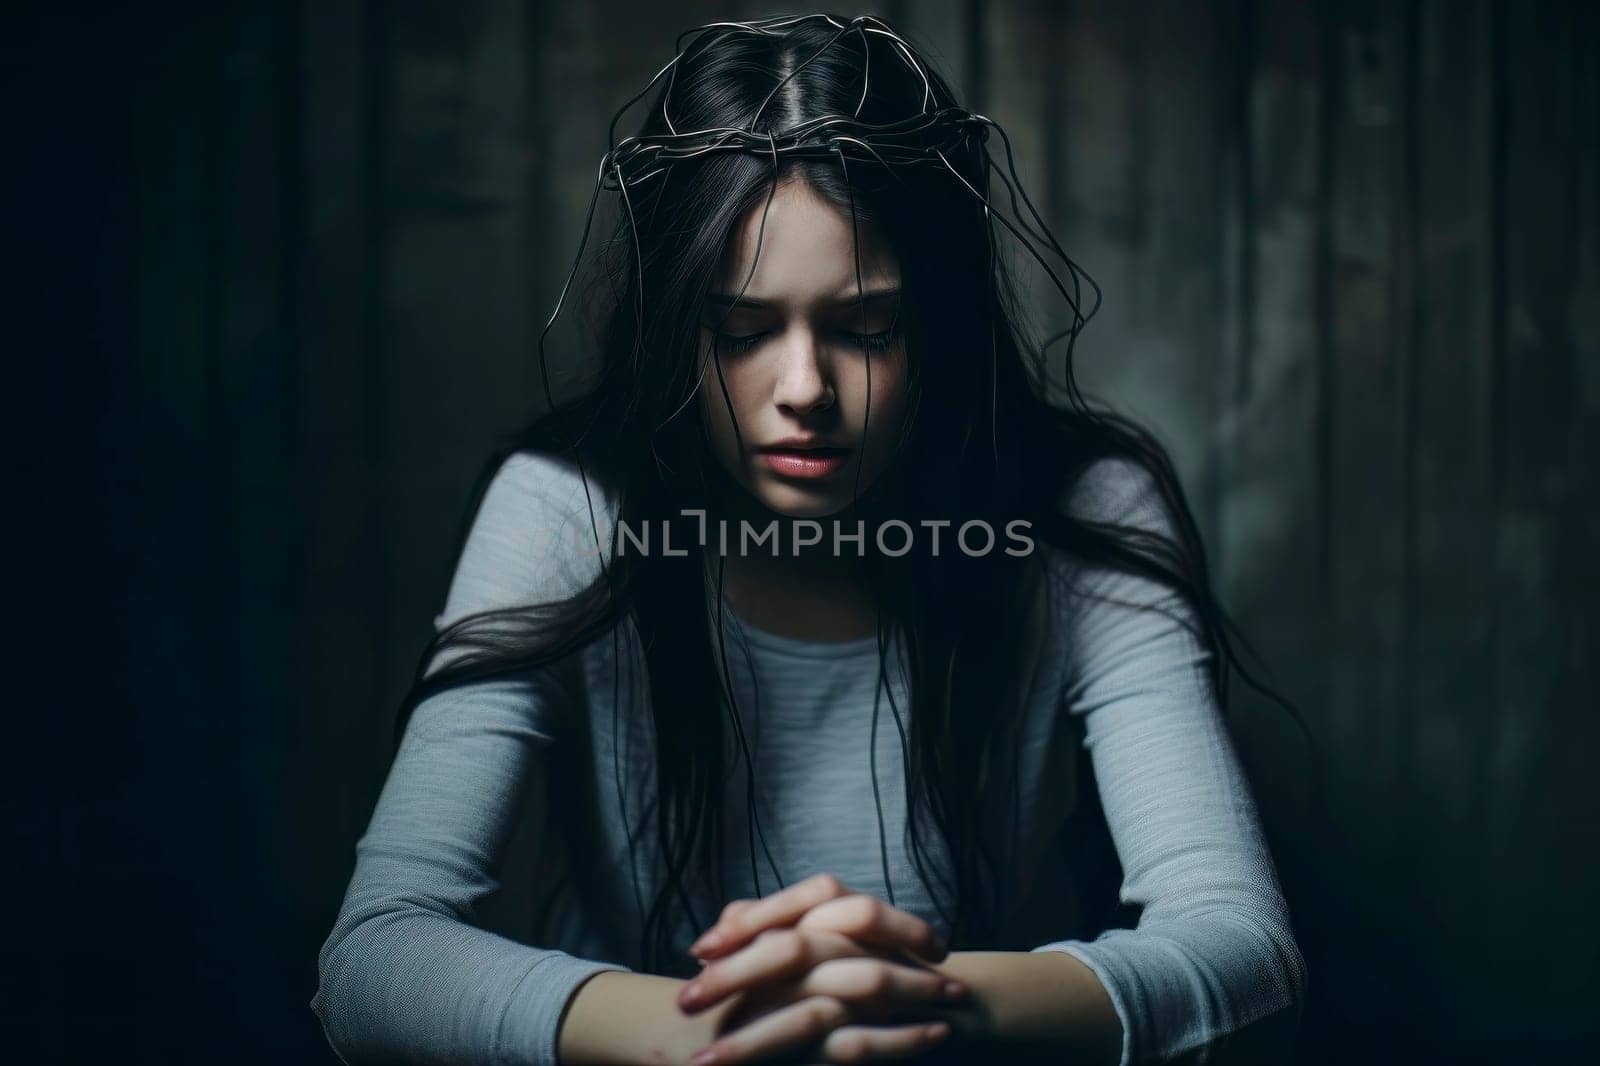 A captivating photo of a young girl marked by the ravages of psychiatric treatment.